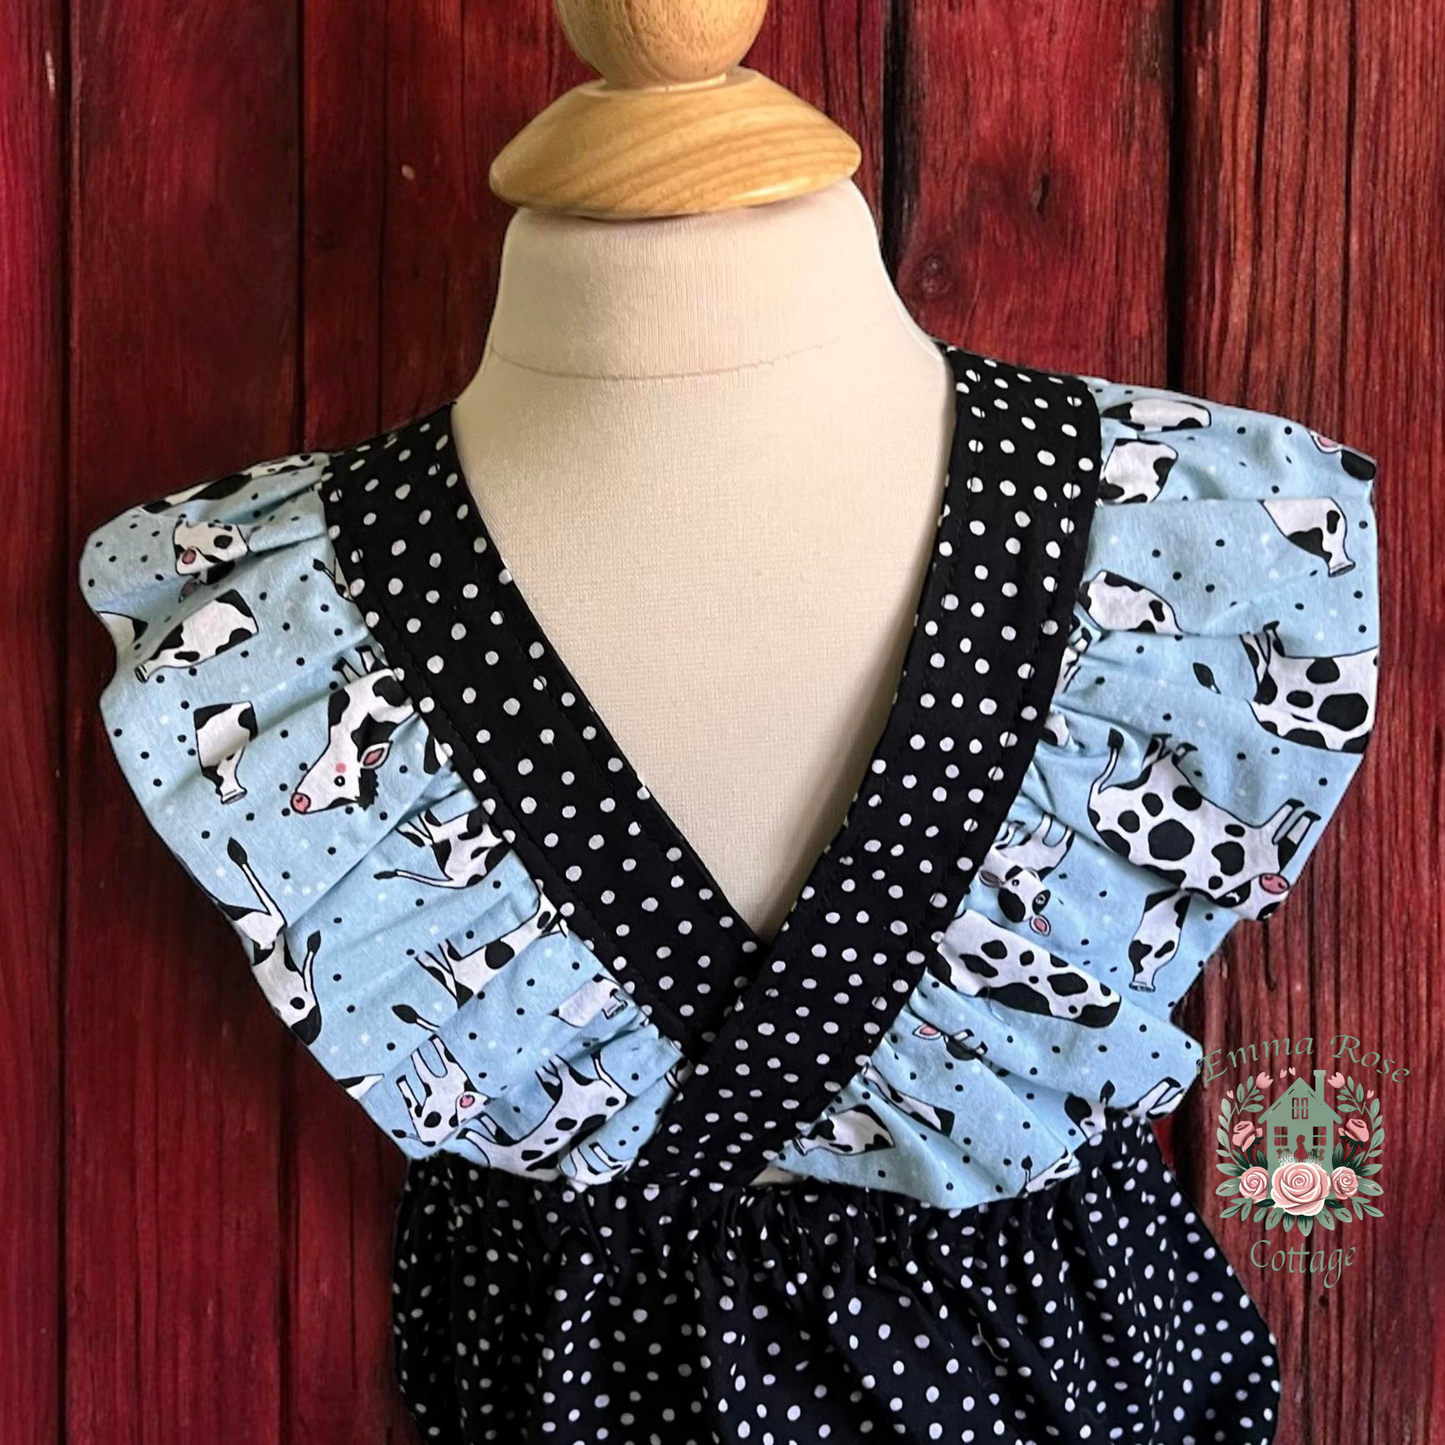 Baby Moo Cows 18-24 mo - Romper & Bonnet, Free Shipping